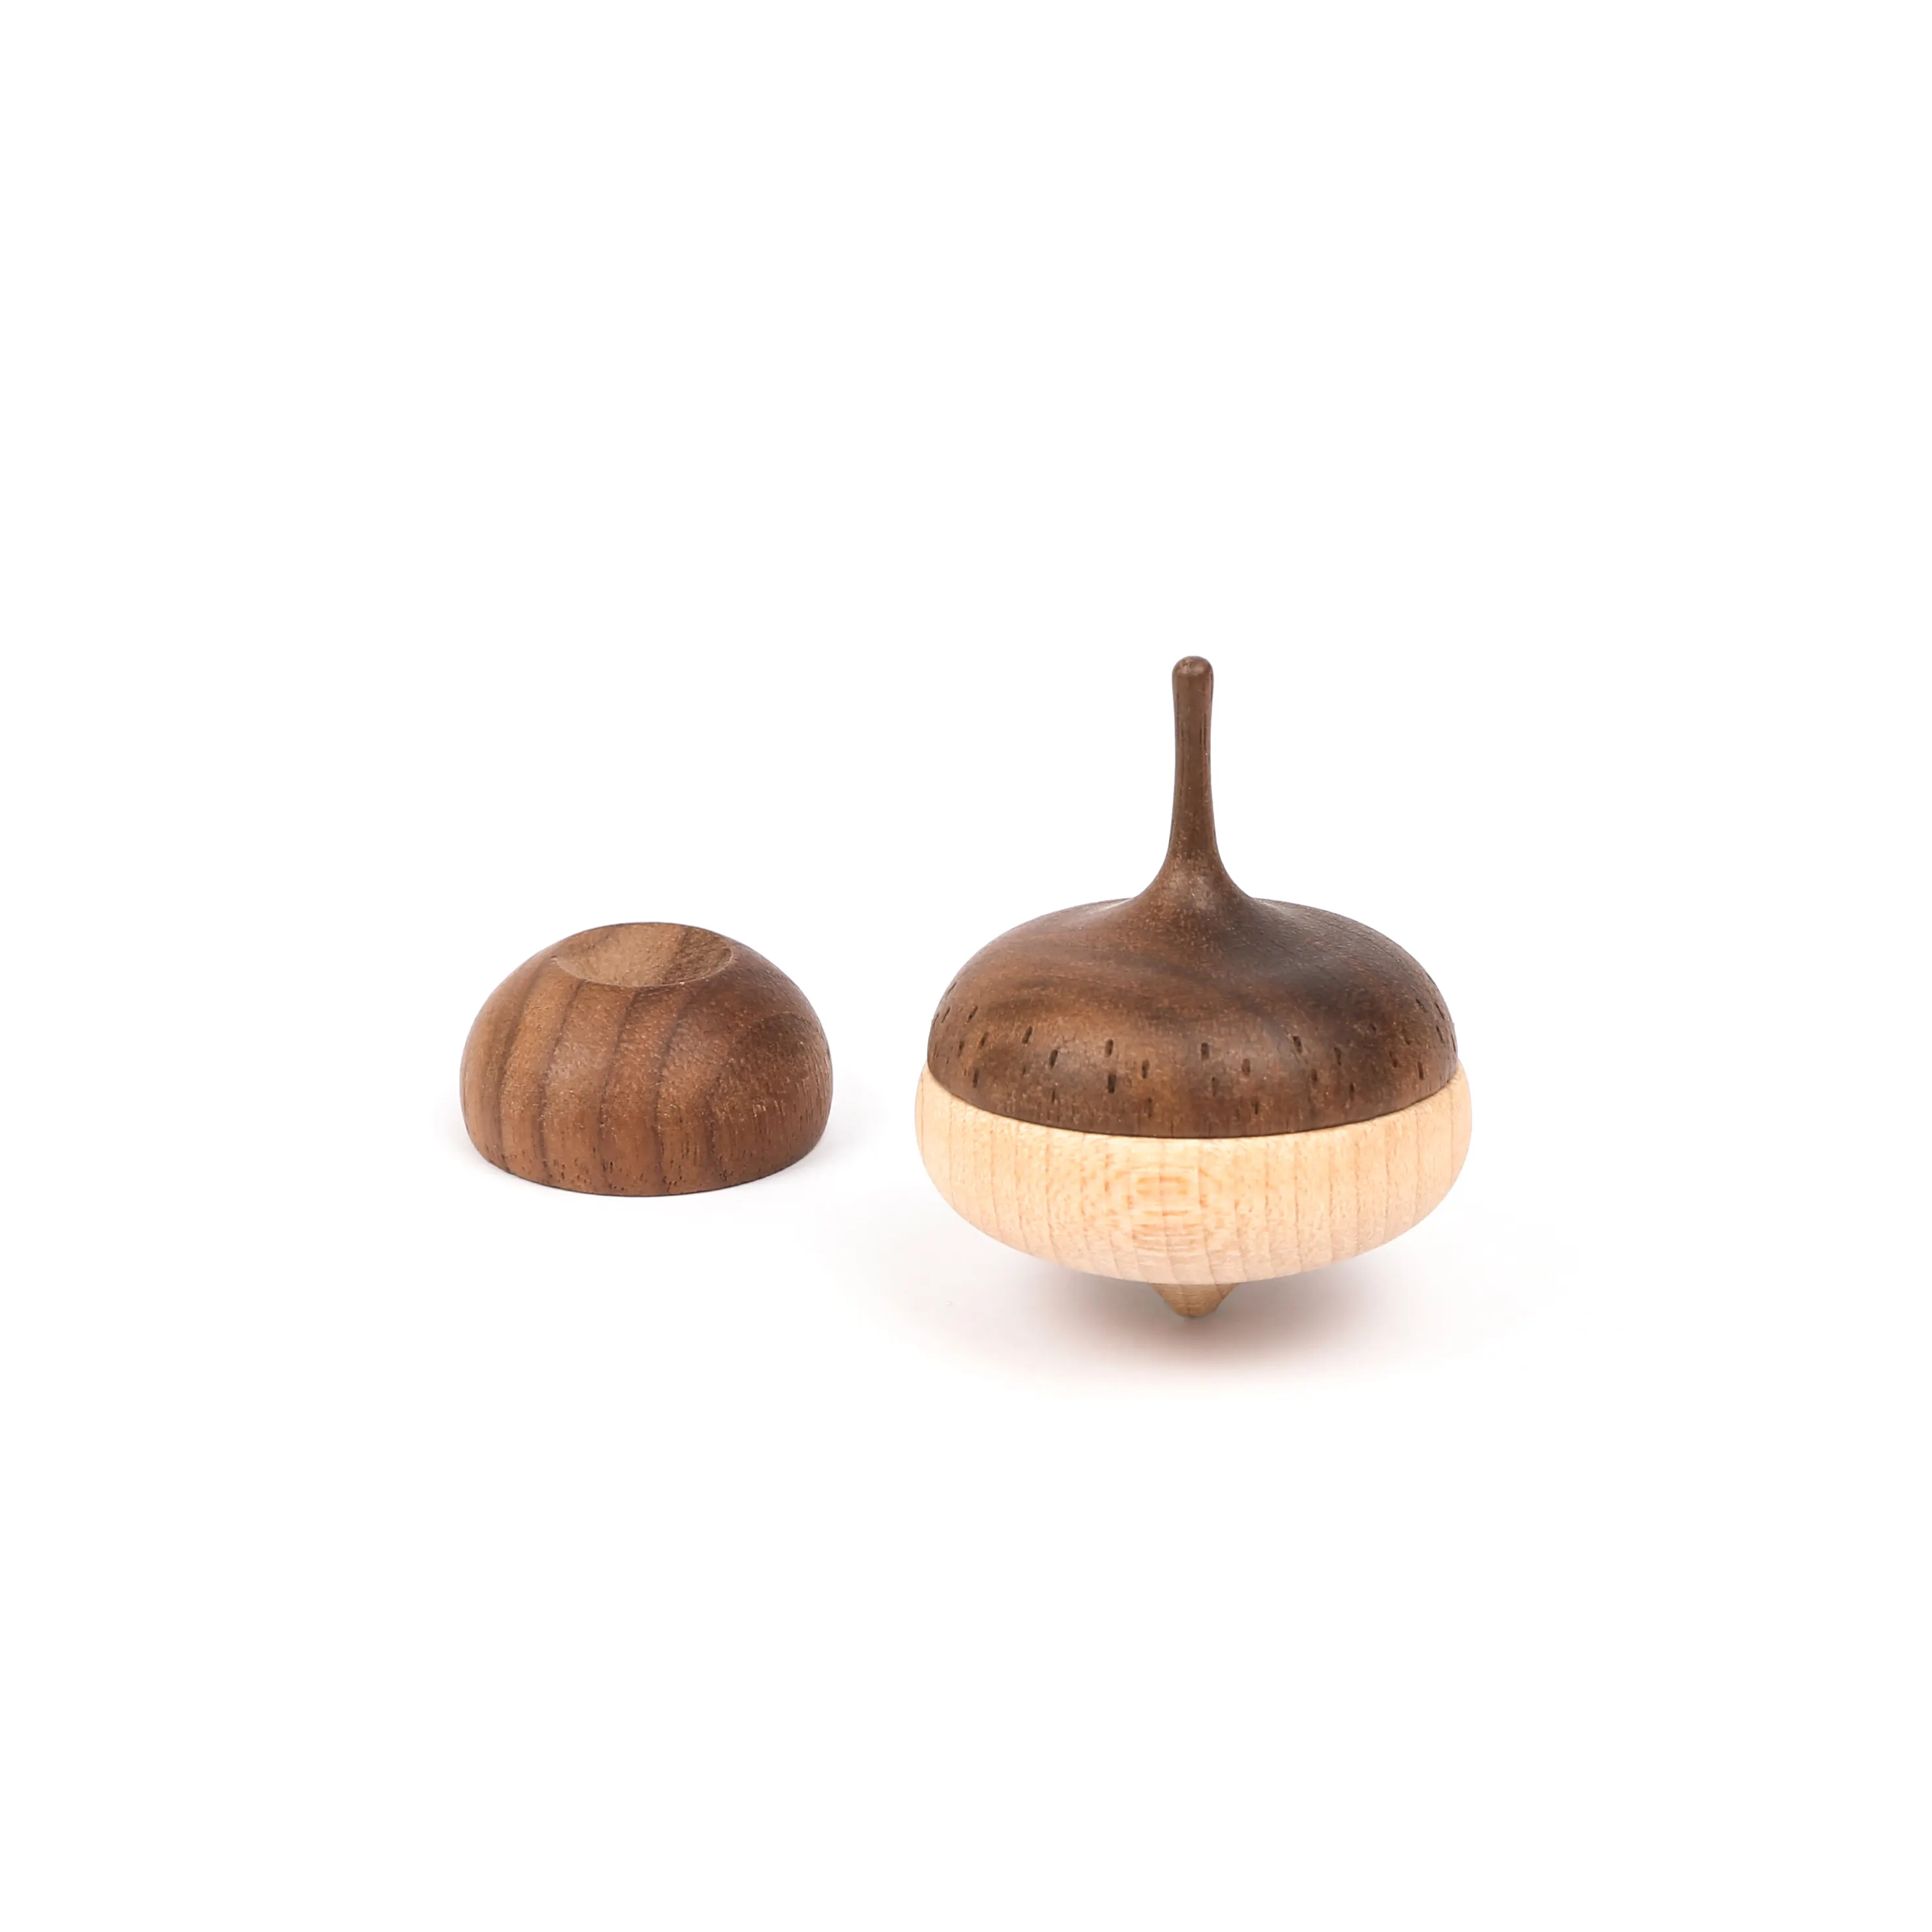 [2.3A] Wooden Spinning Top Wooden Toy Premium Gift Giveaway Chestnut Acorn